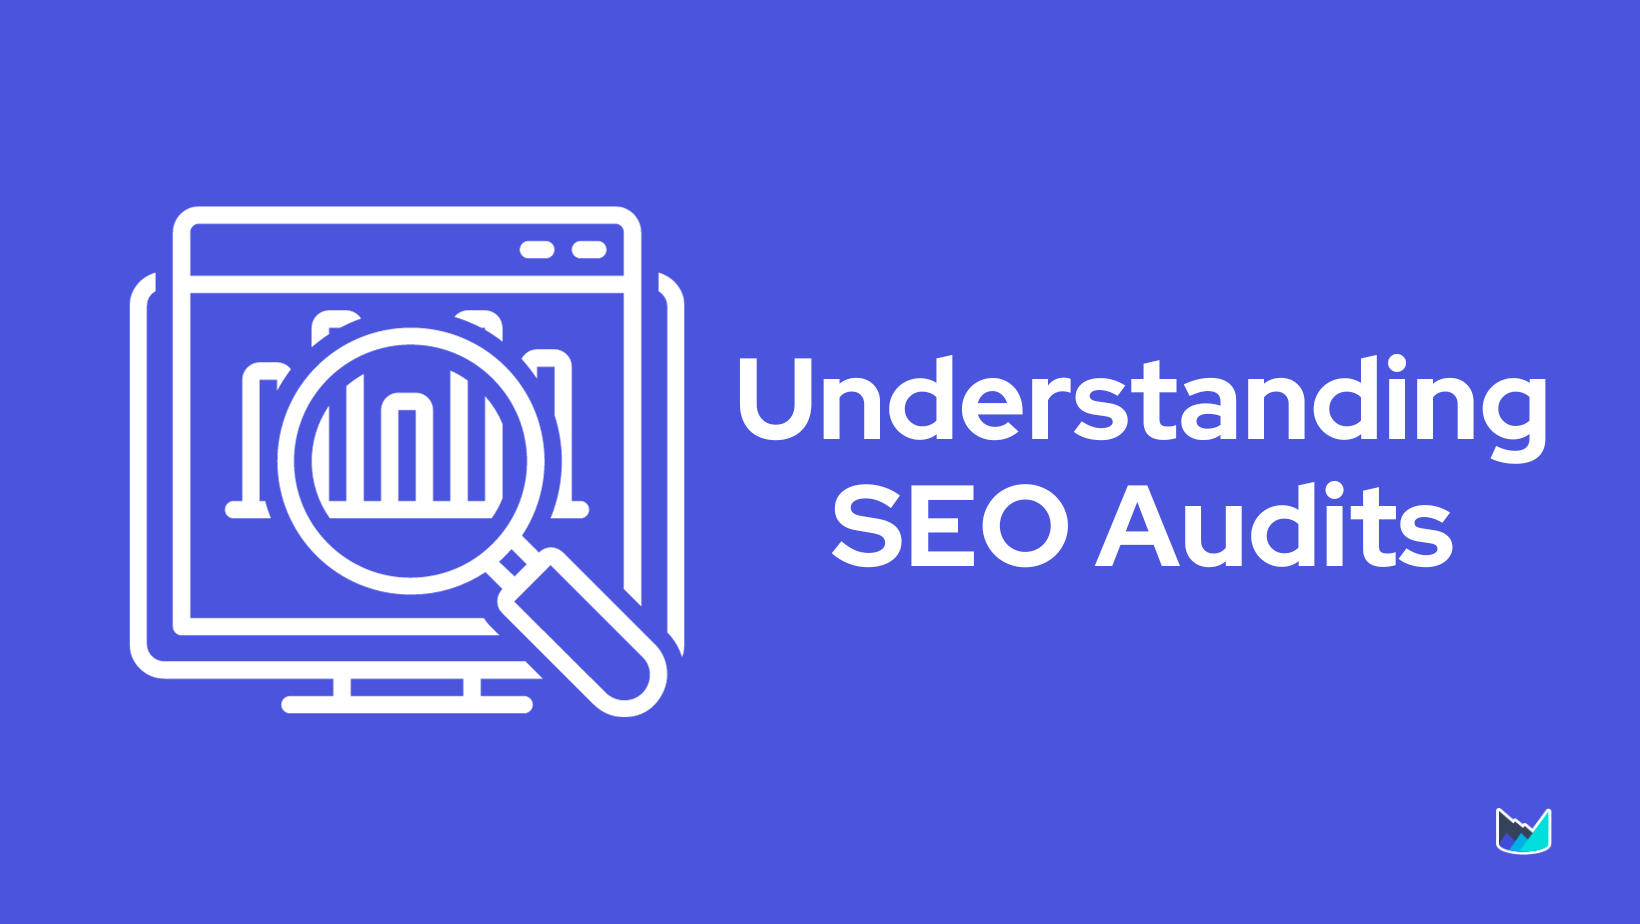 How Much Does an SEO Audit Cost in 2023? Website Audit Pricing and Costs